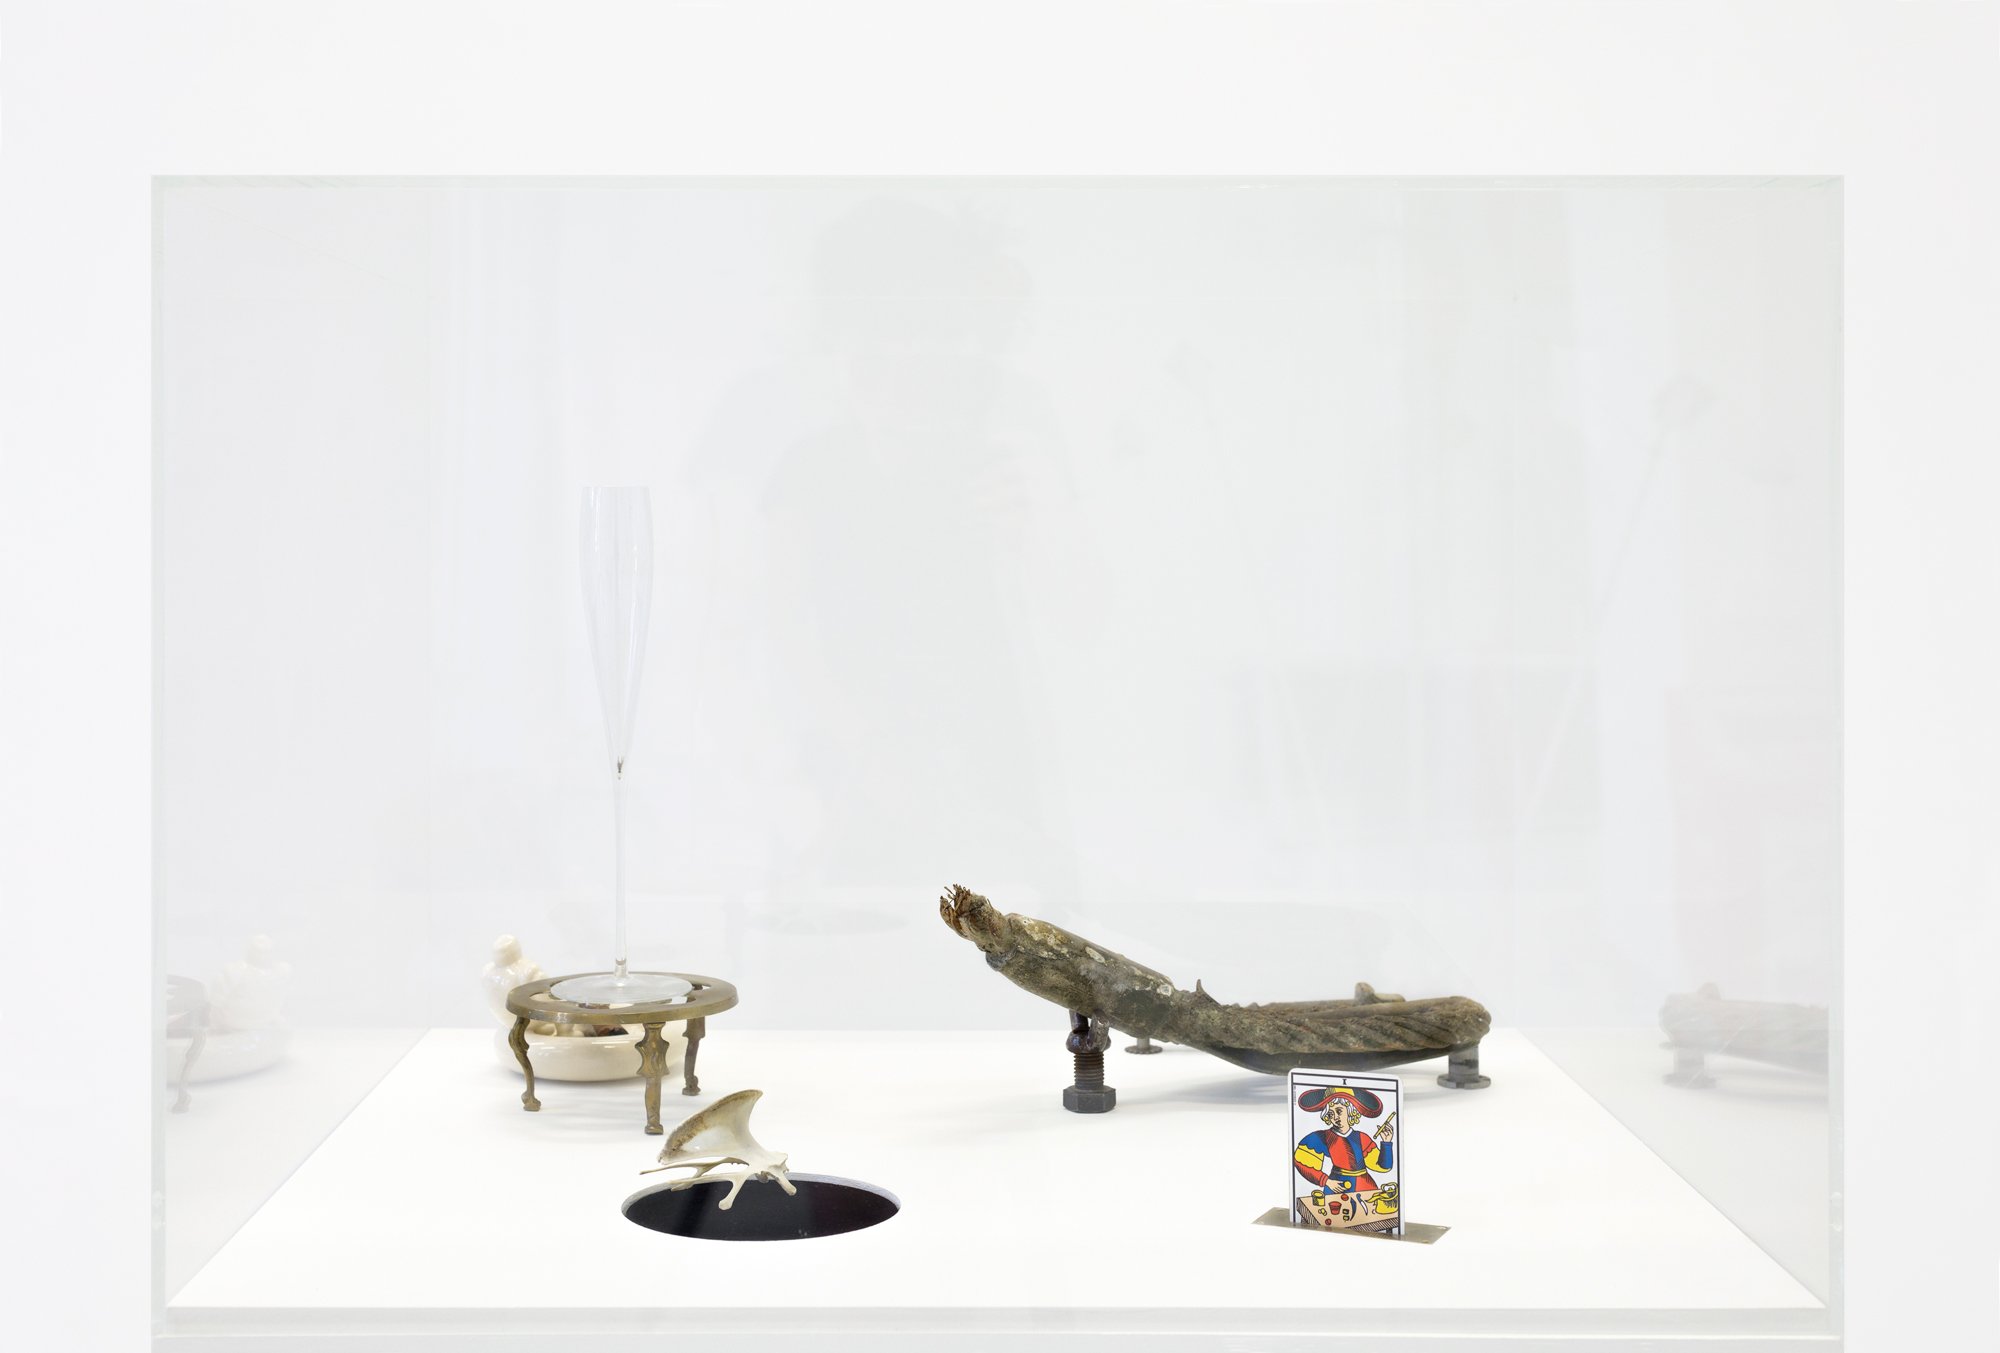   40524839 , custom made cabinet, tarot card, chicken bone, motor, champagne flute, dead fly, steel rope, michelin ceramic ashtray with half smoked cuban cigar, 2018 